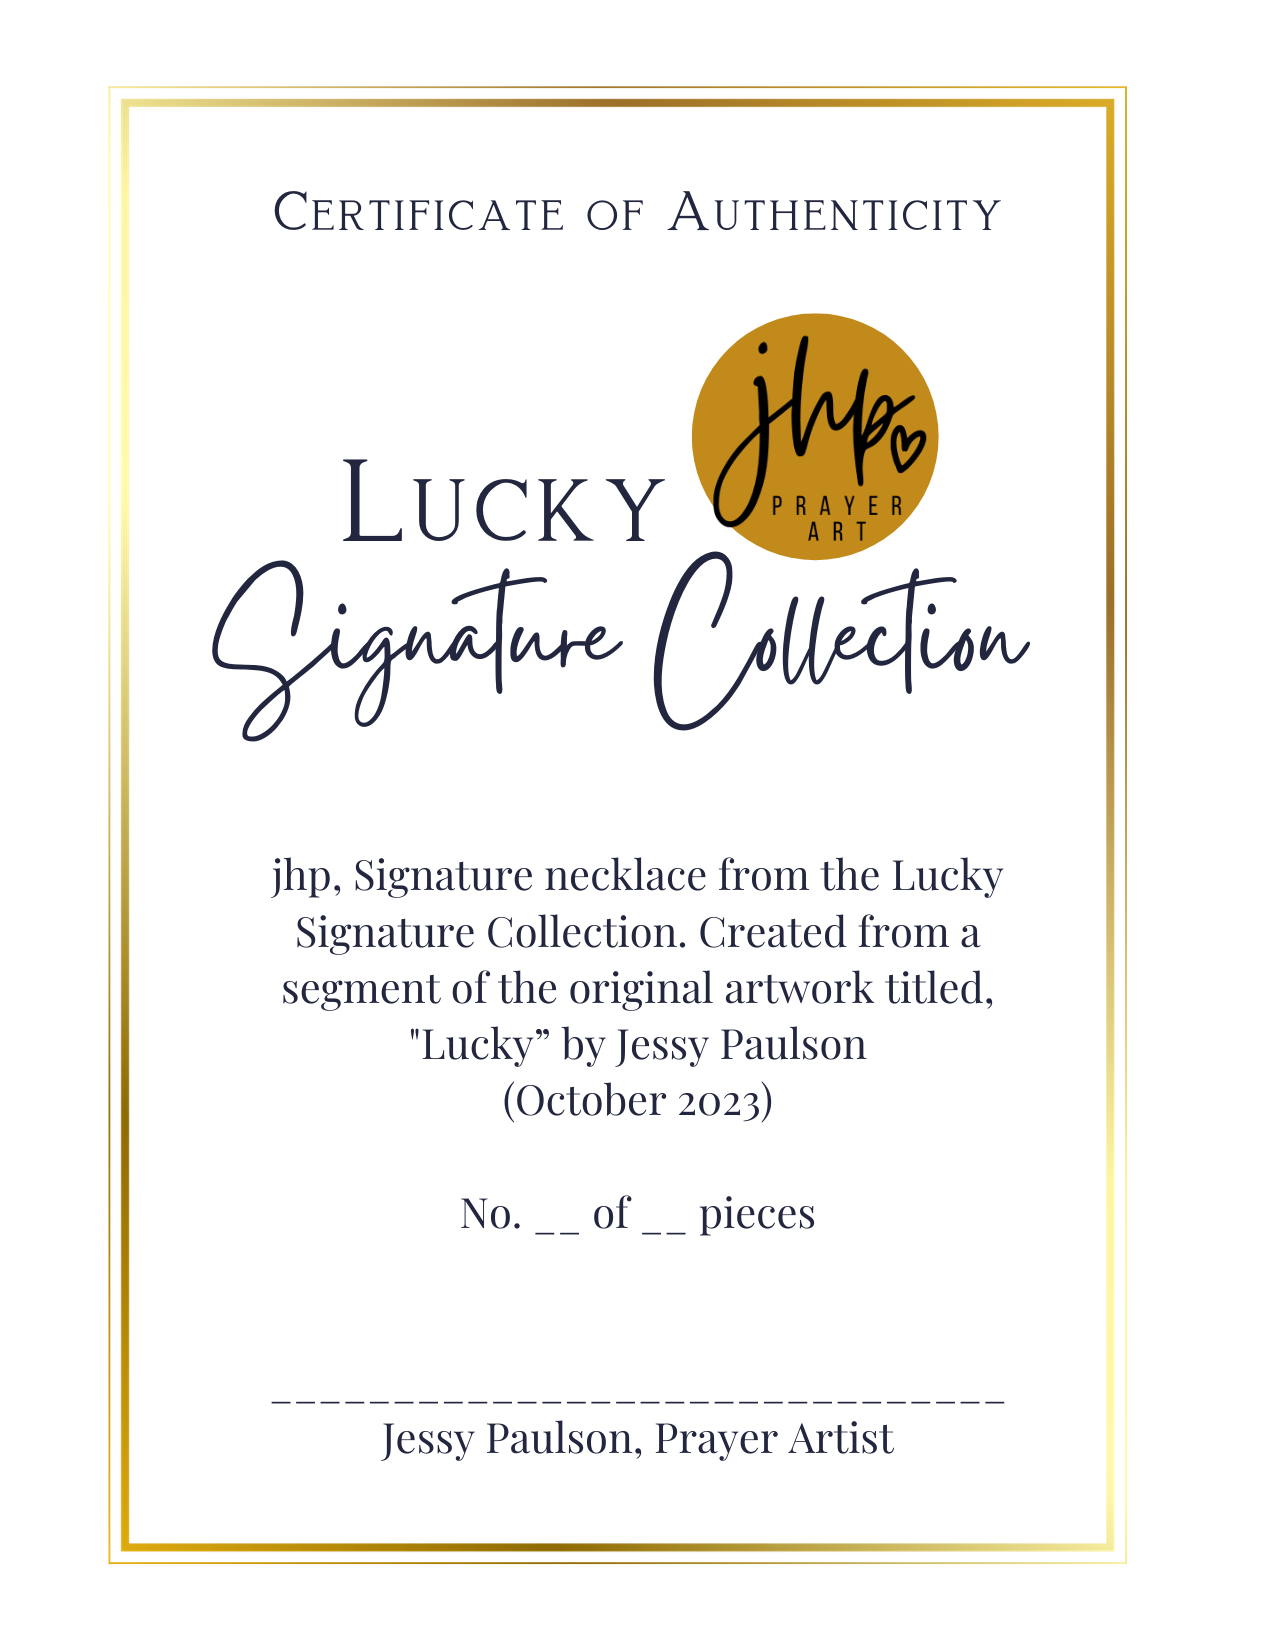 Lucky, a jhp Signature Necklace I